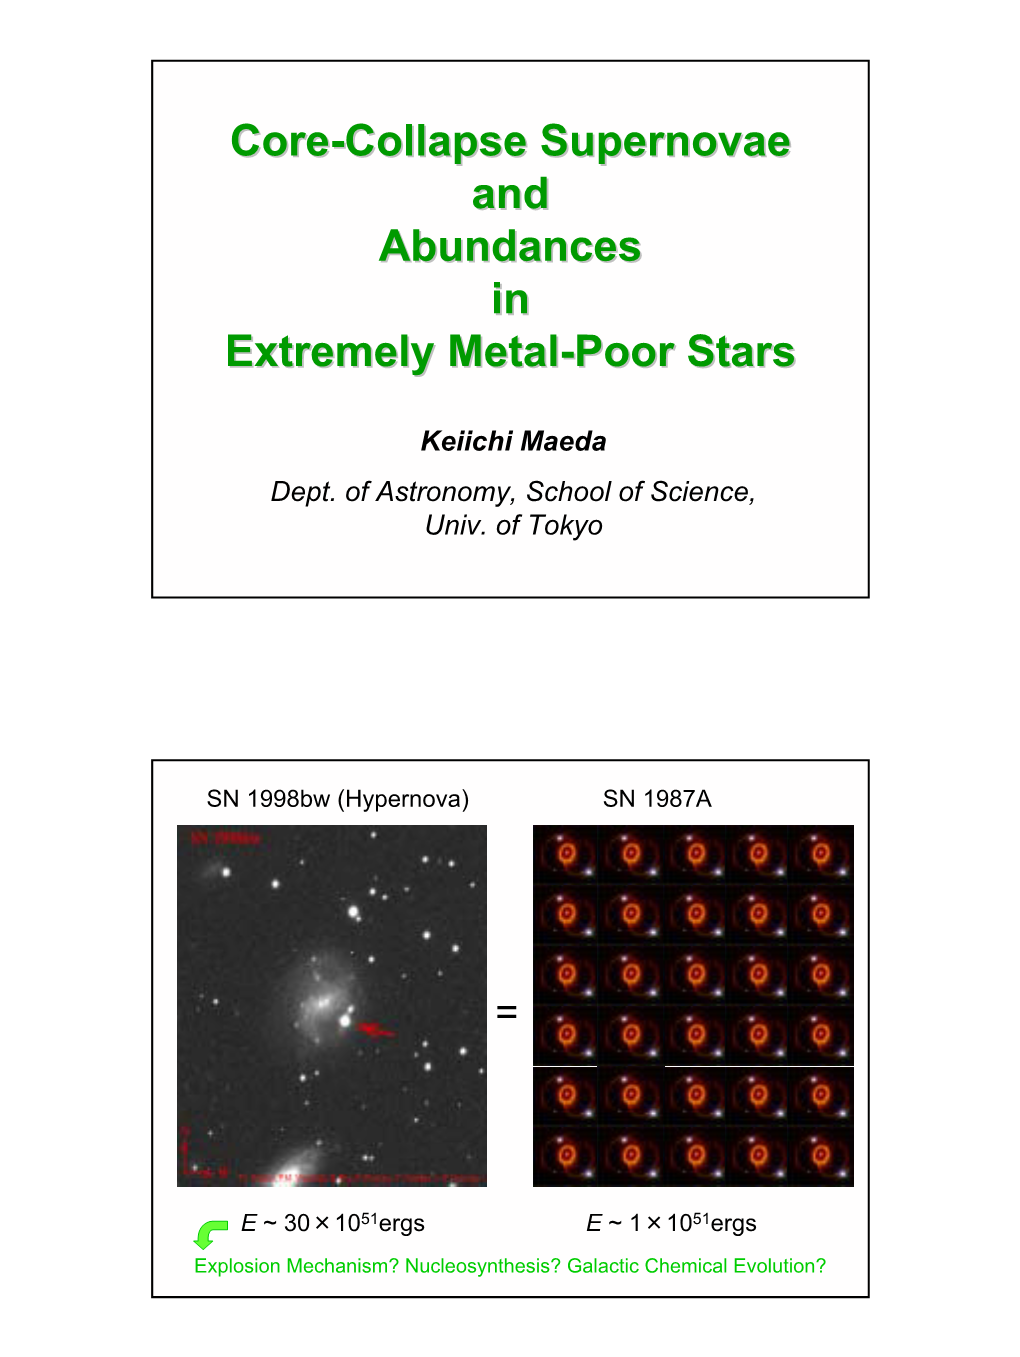 Core-Collapse Supernovae and Abundances in Extremely Metal-Poor Stars